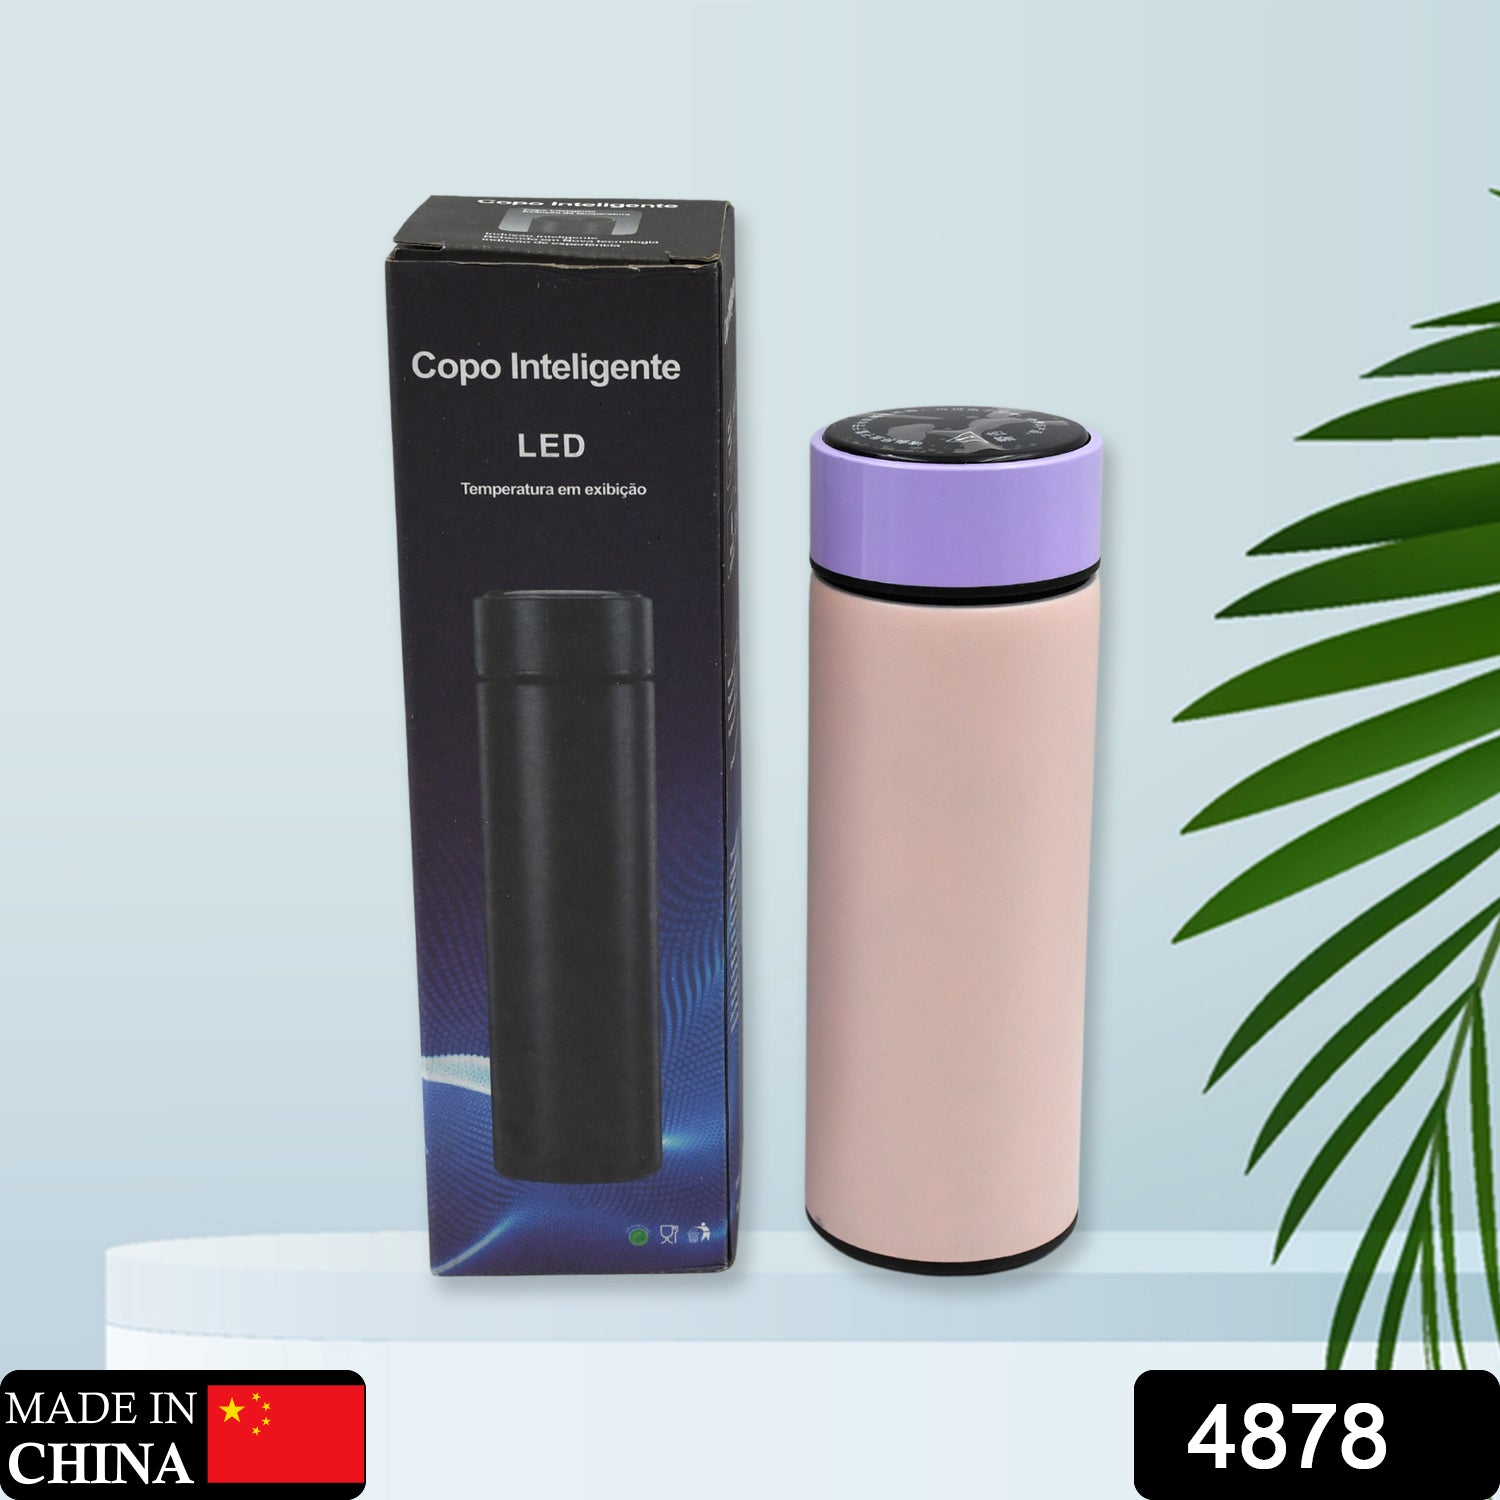 The smart water bottle has a waterproof LED display, Stainless Steel BPA-Free Leak Proof Double Walled Vacuum Insulated Cold and Warm Water Bottle with LED Temperature Display